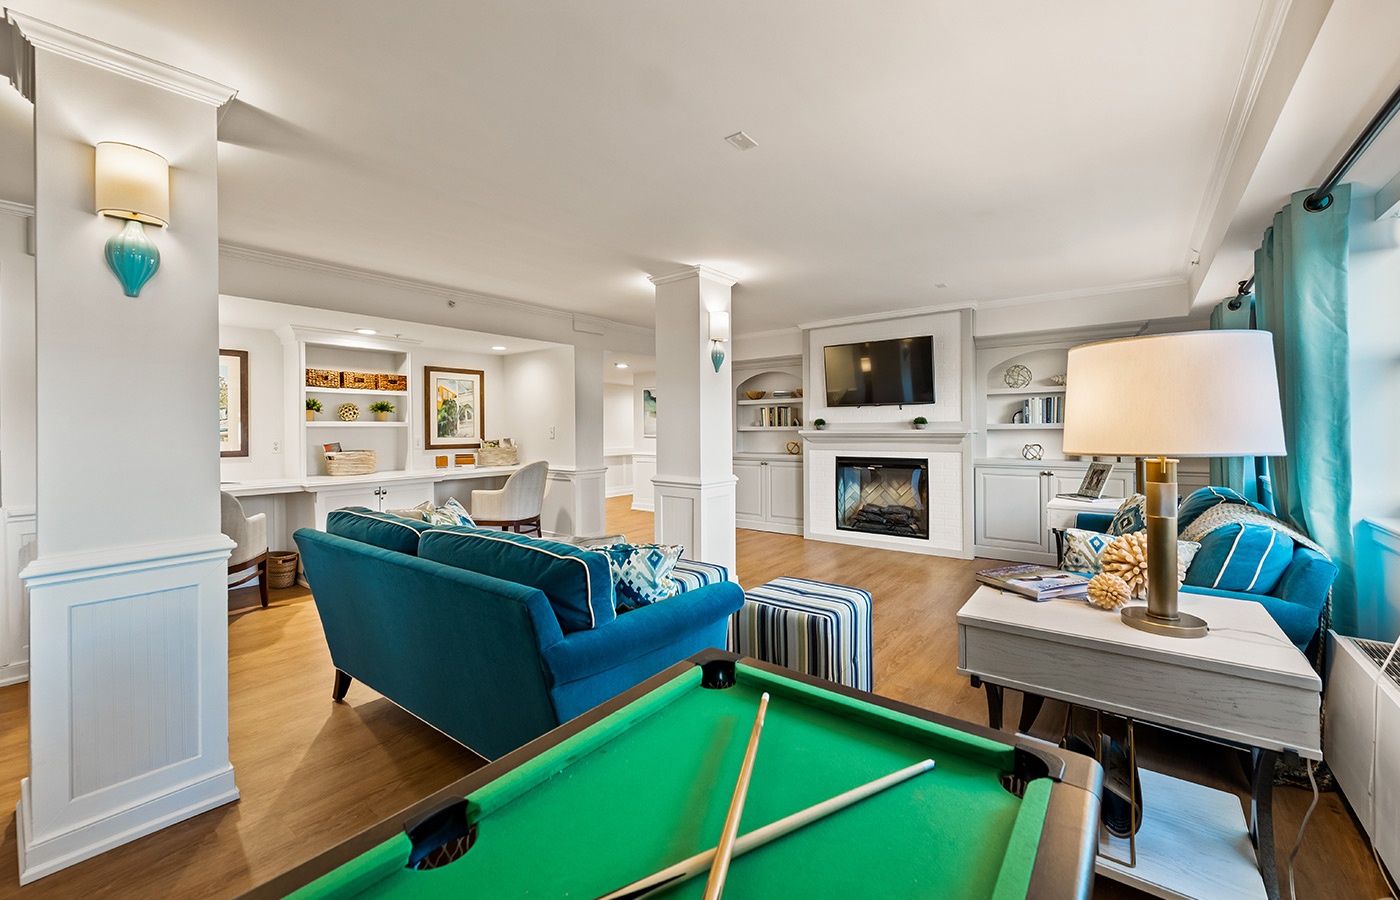 Activity room with a pool table, couch, and fireplace.